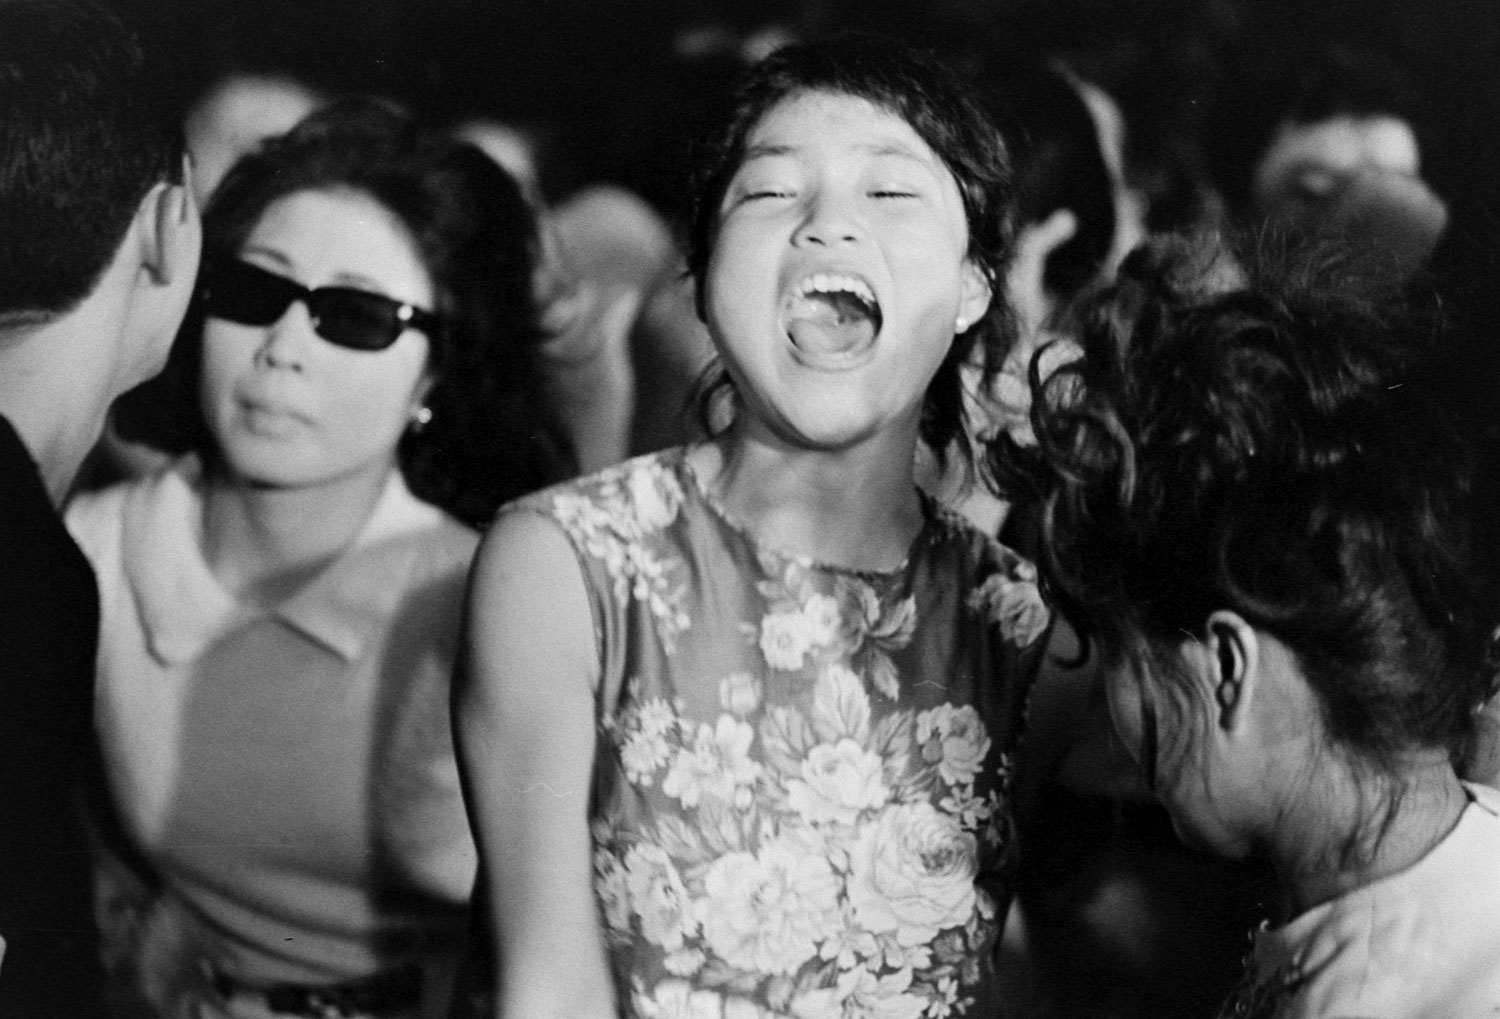 Screaming for the "Tokyo Beatles," 1964.